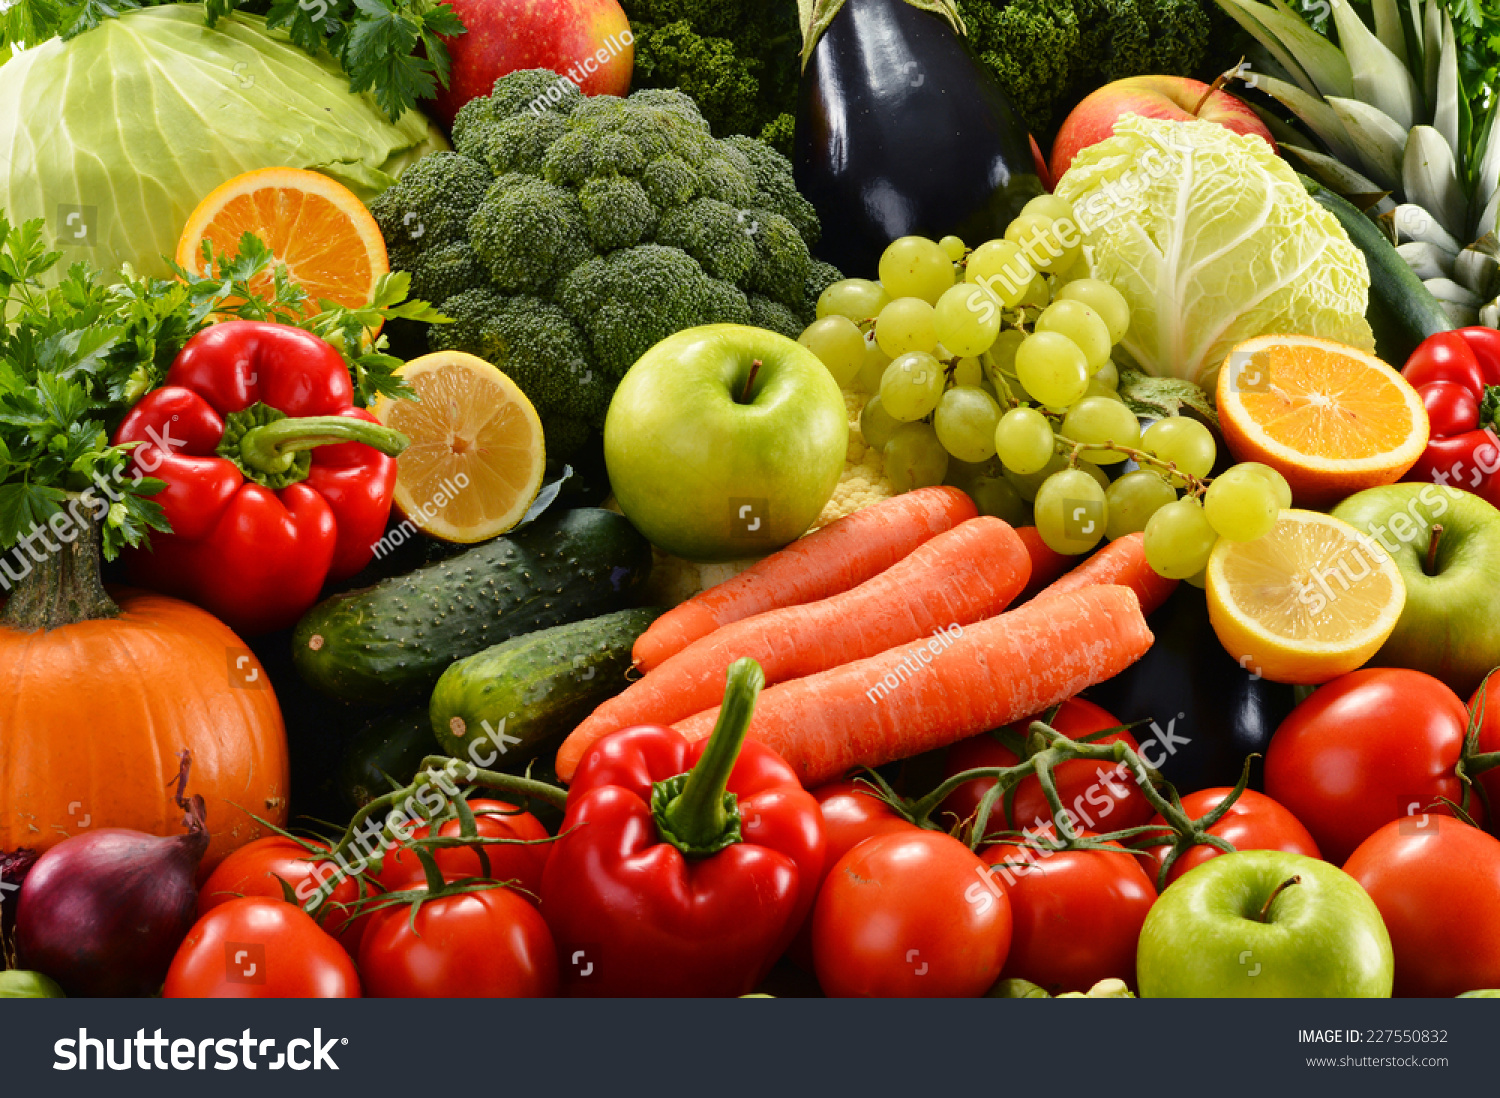 Composition with assorted raw organic vegetables #227550832